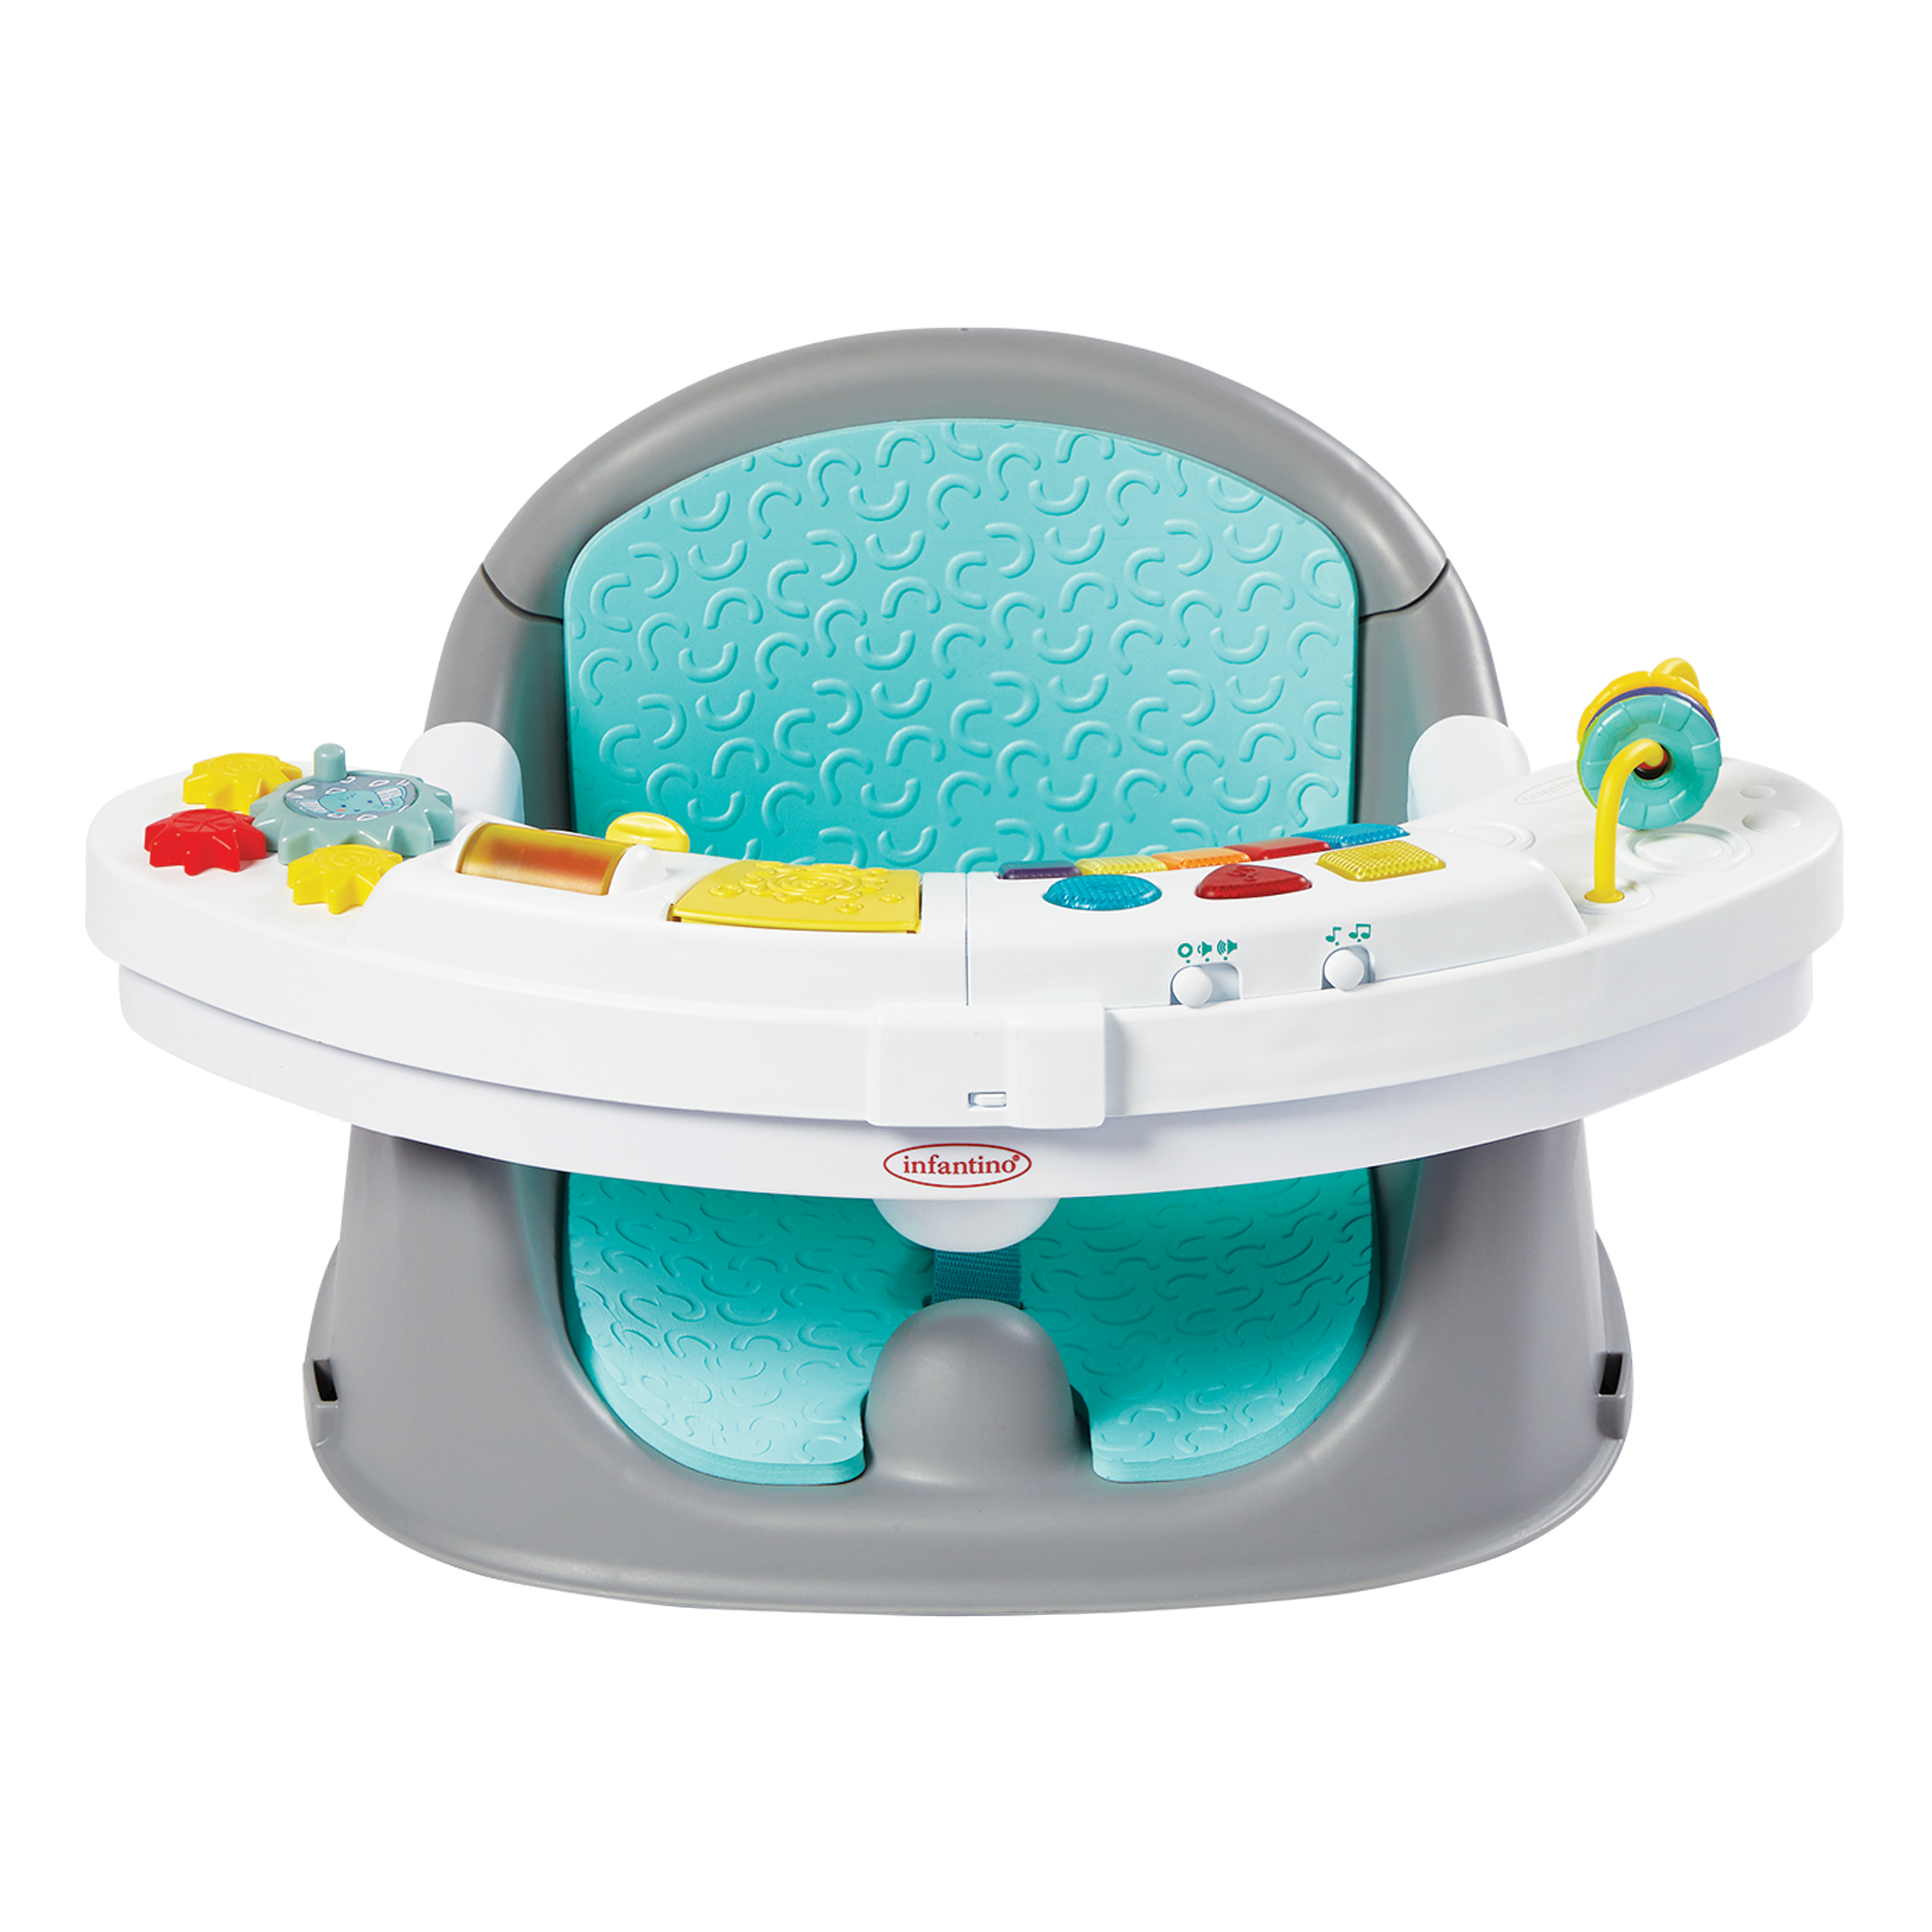 Infantino Music & Lights 3-in-1 Discovery Seat and Booster for Babies and Toddlers, Unisex, Teal - image 1 of 6